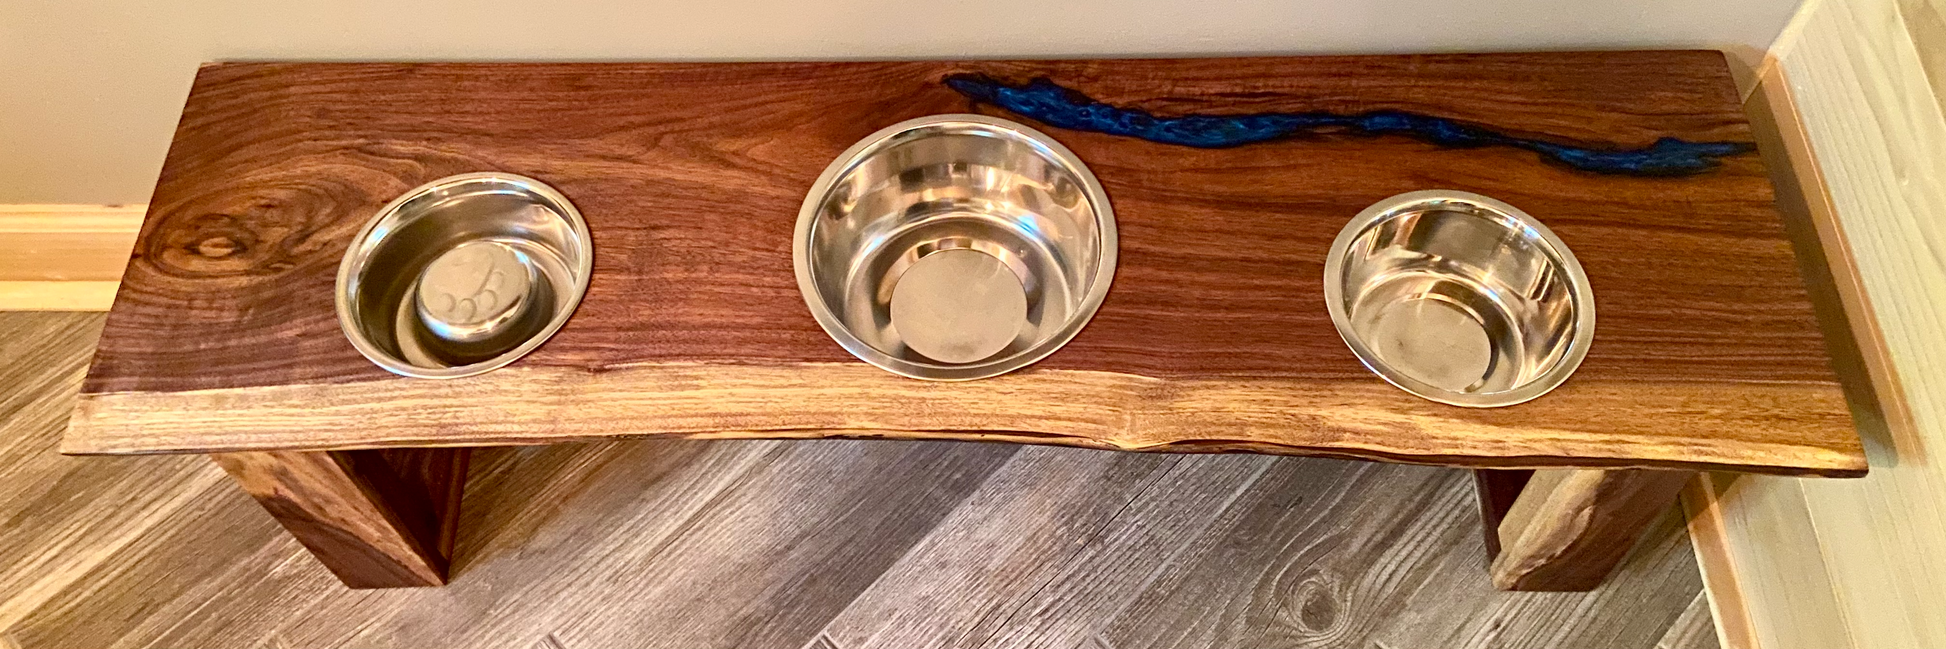 Live Edge Raised Pet Stand for Food or Water Bowls, Spalted Maple or Black  Walnut